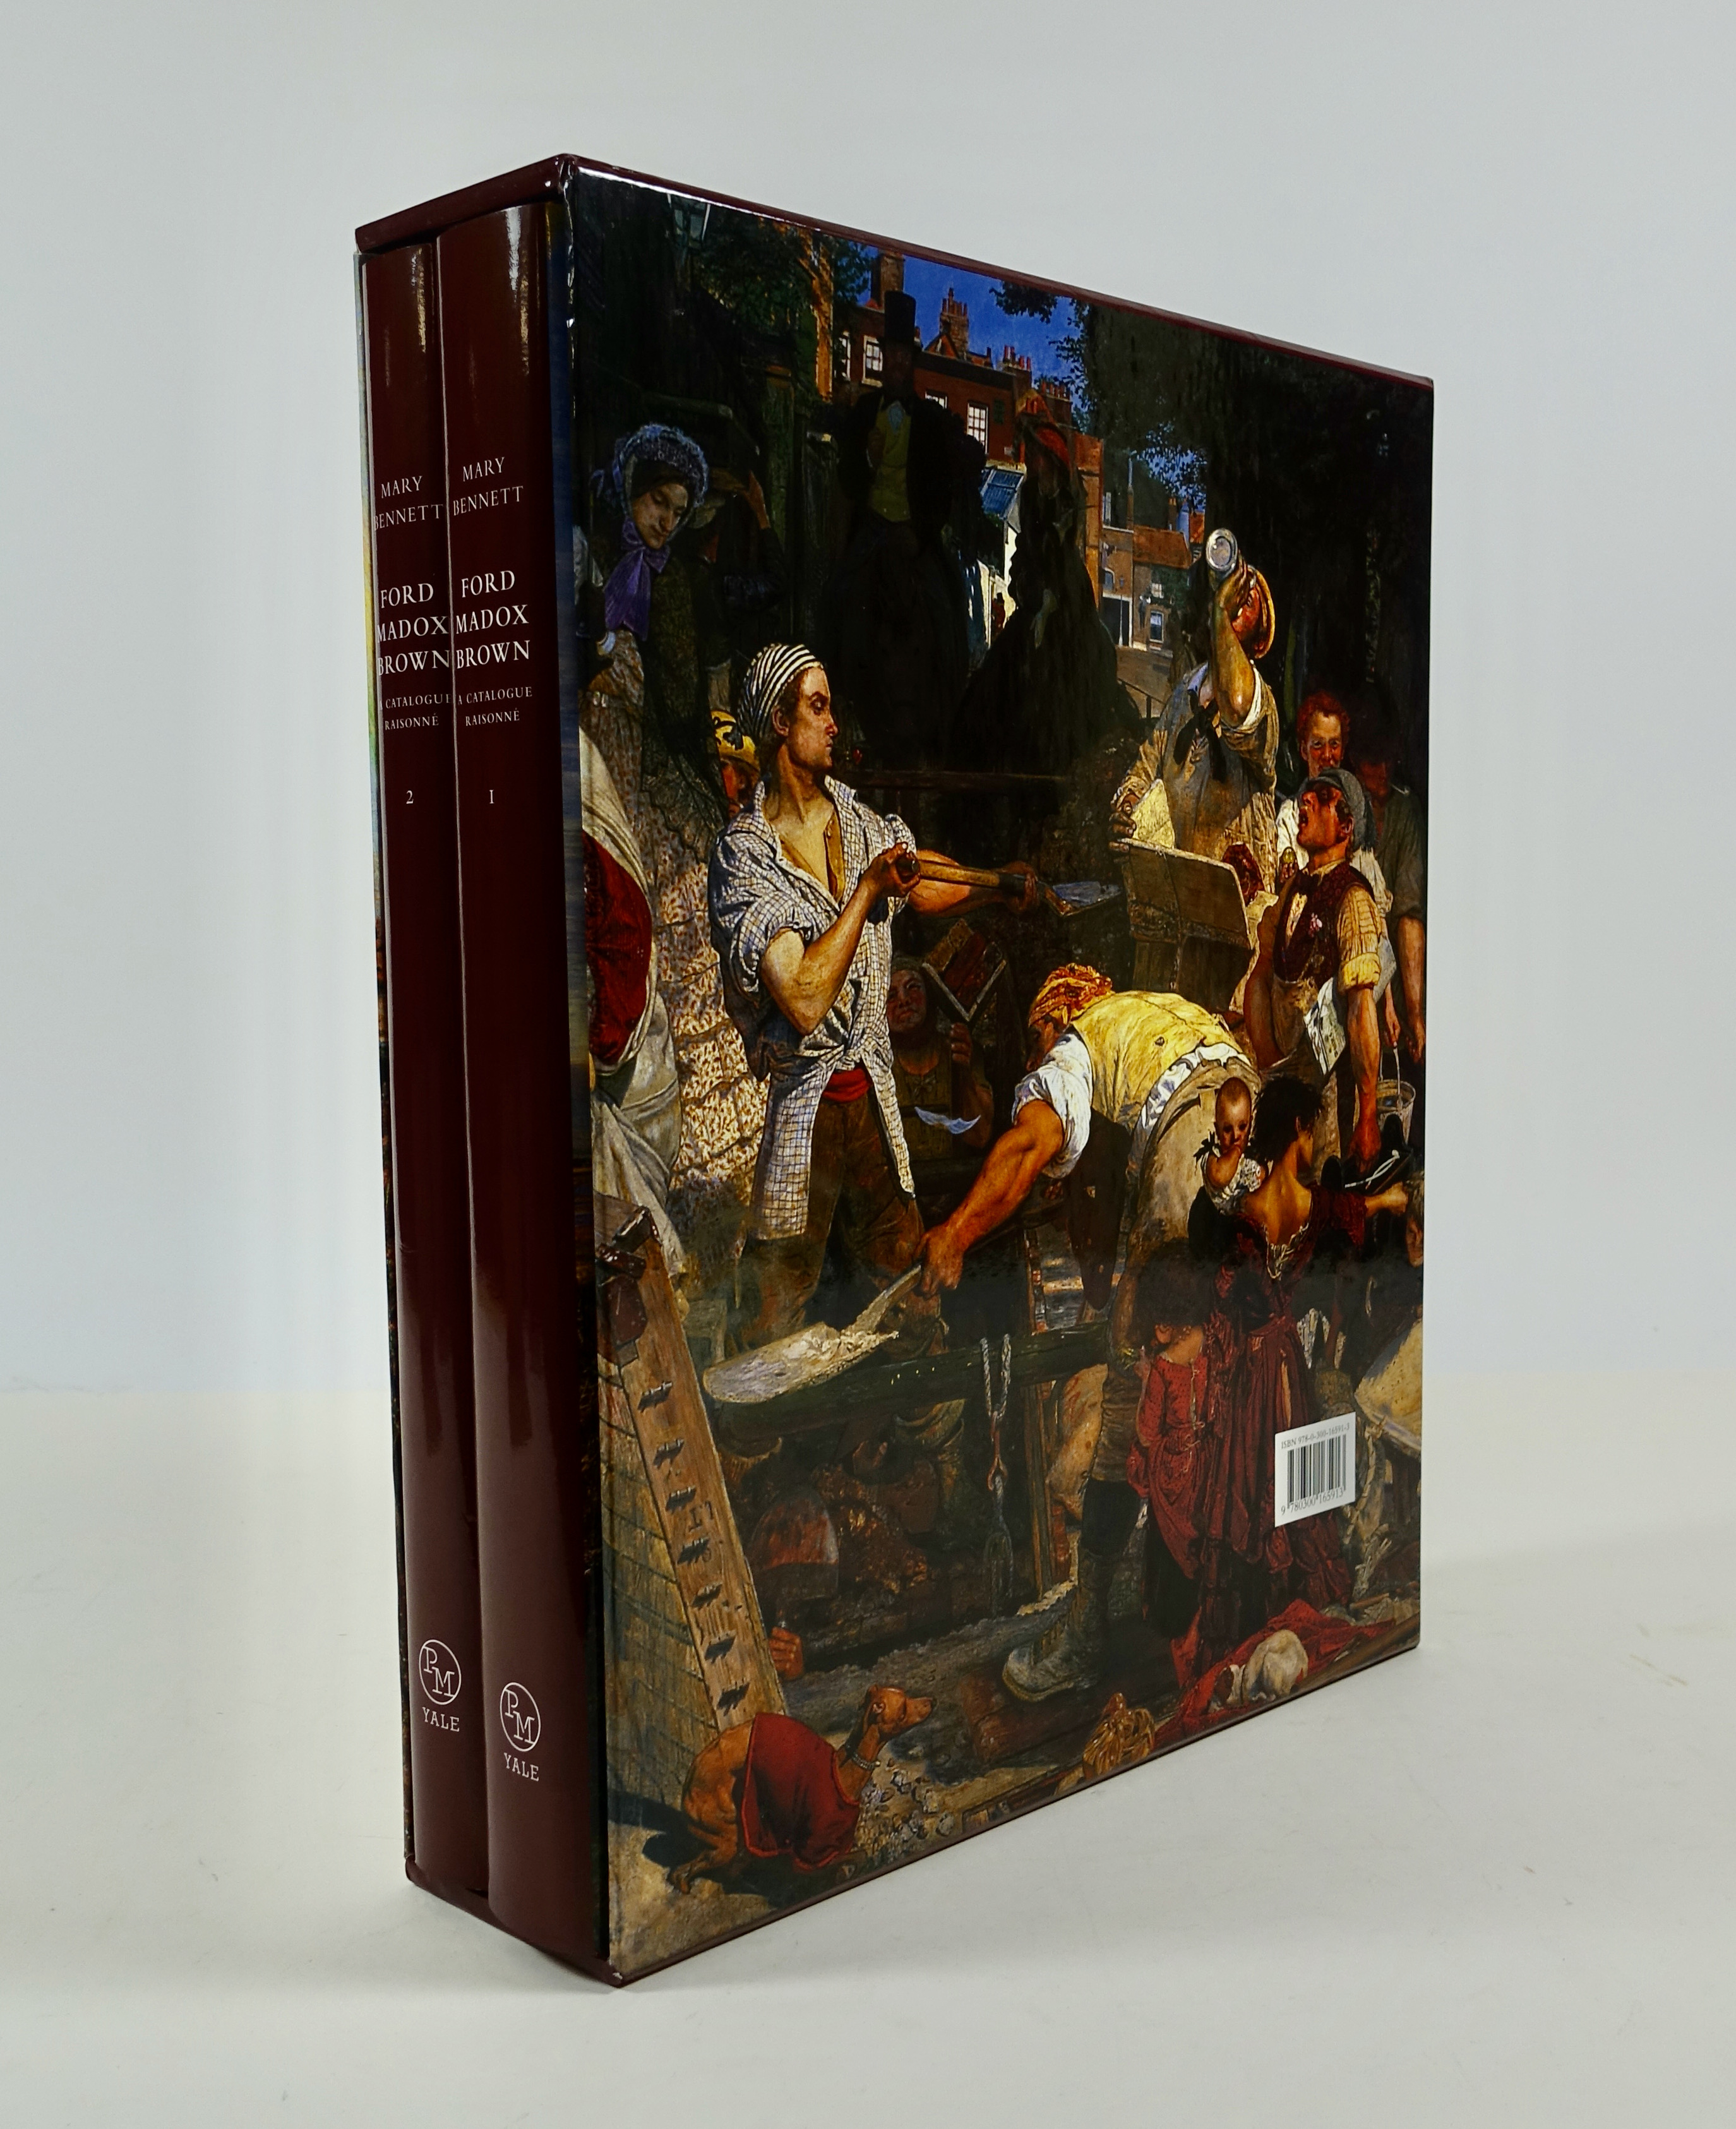 MADOX BROWN -- BENNETT, M. Ford Madox Brown. A catalogue raisonné. New Haven